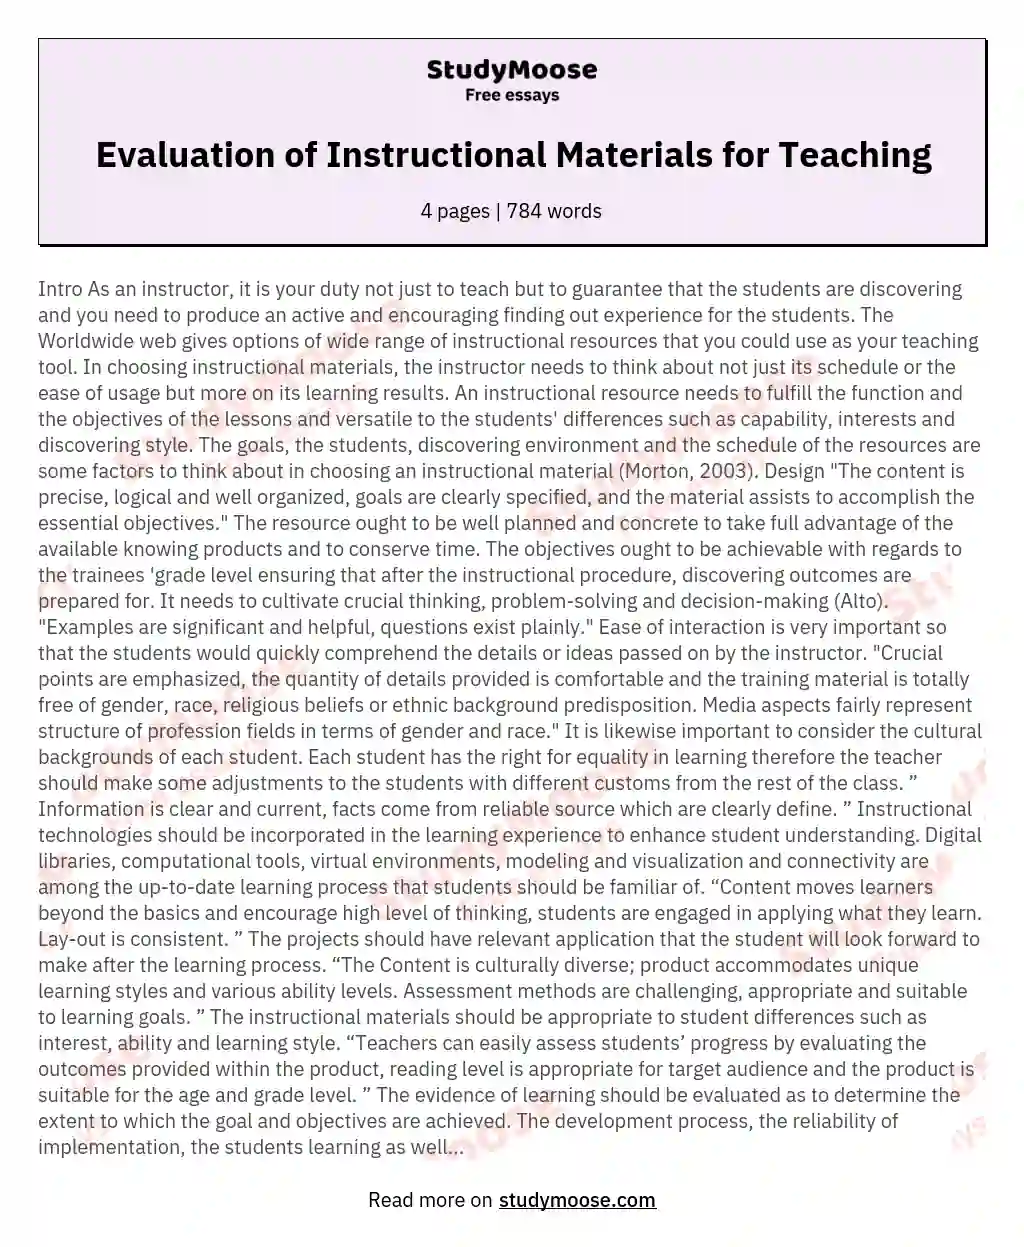 development and evaluation of instructional materials thesis